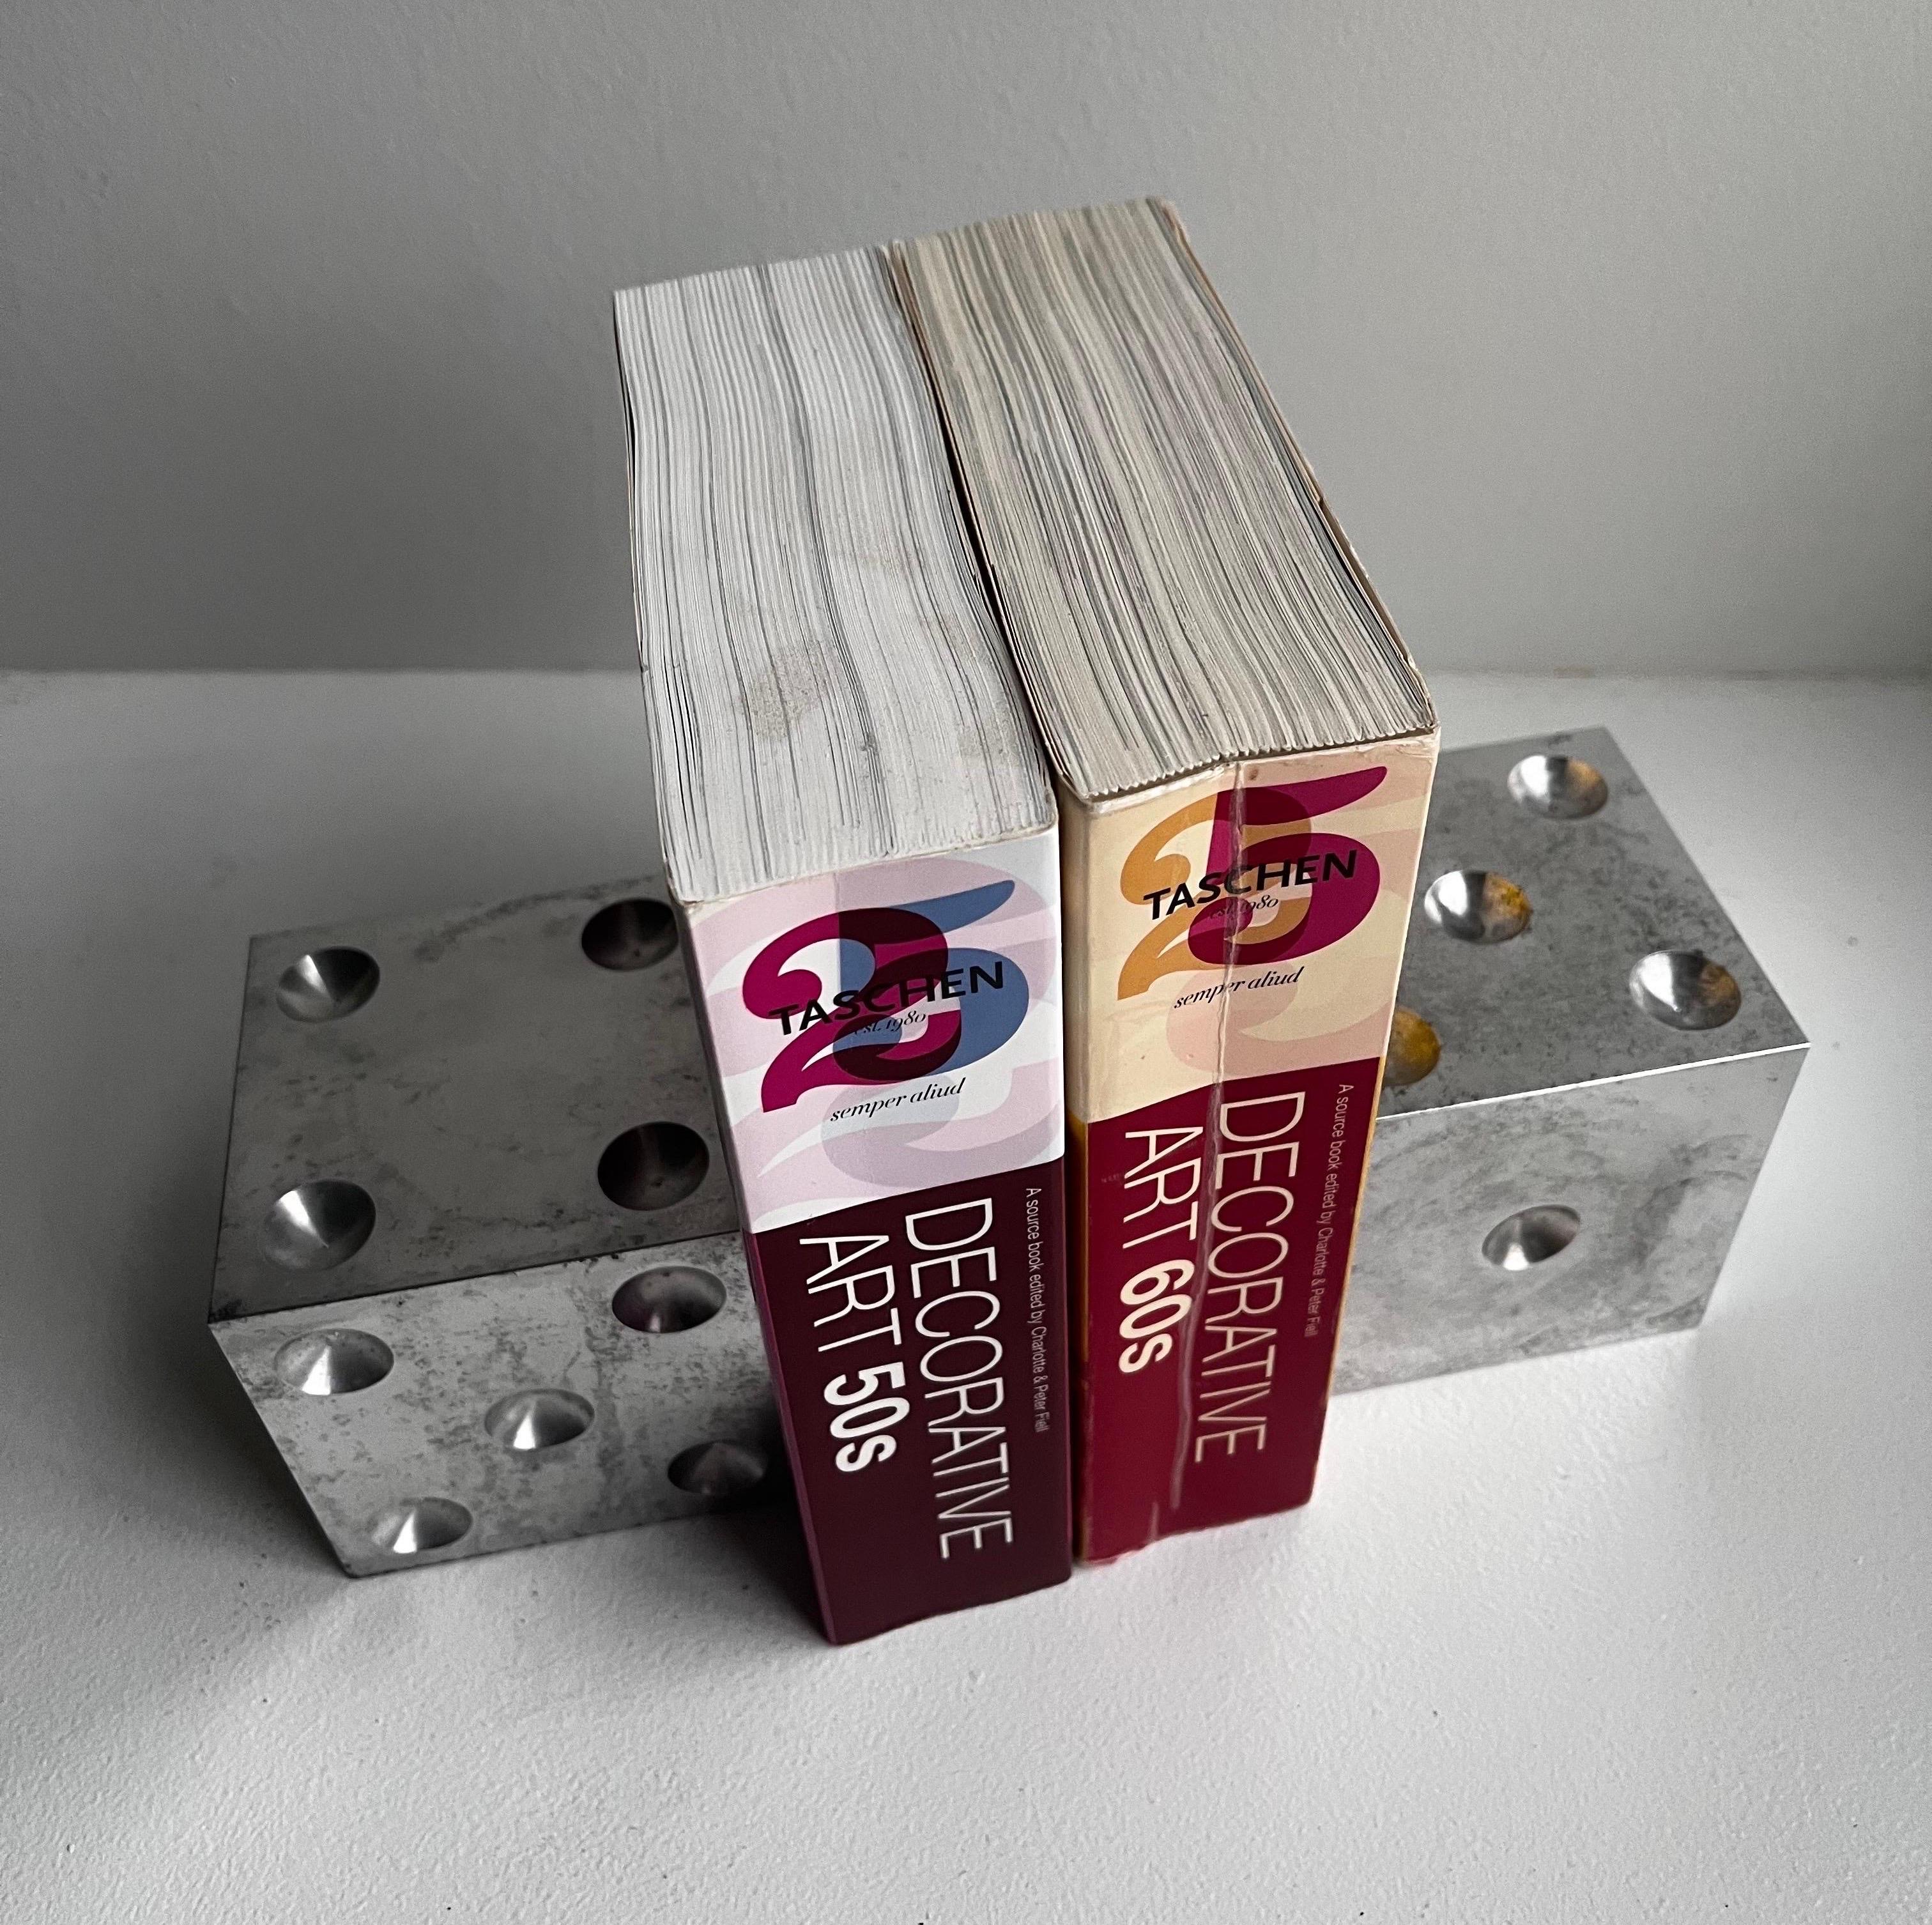 Metalwork Large Solid Aluminum Dice, Bookends, Sculpture  For Sale